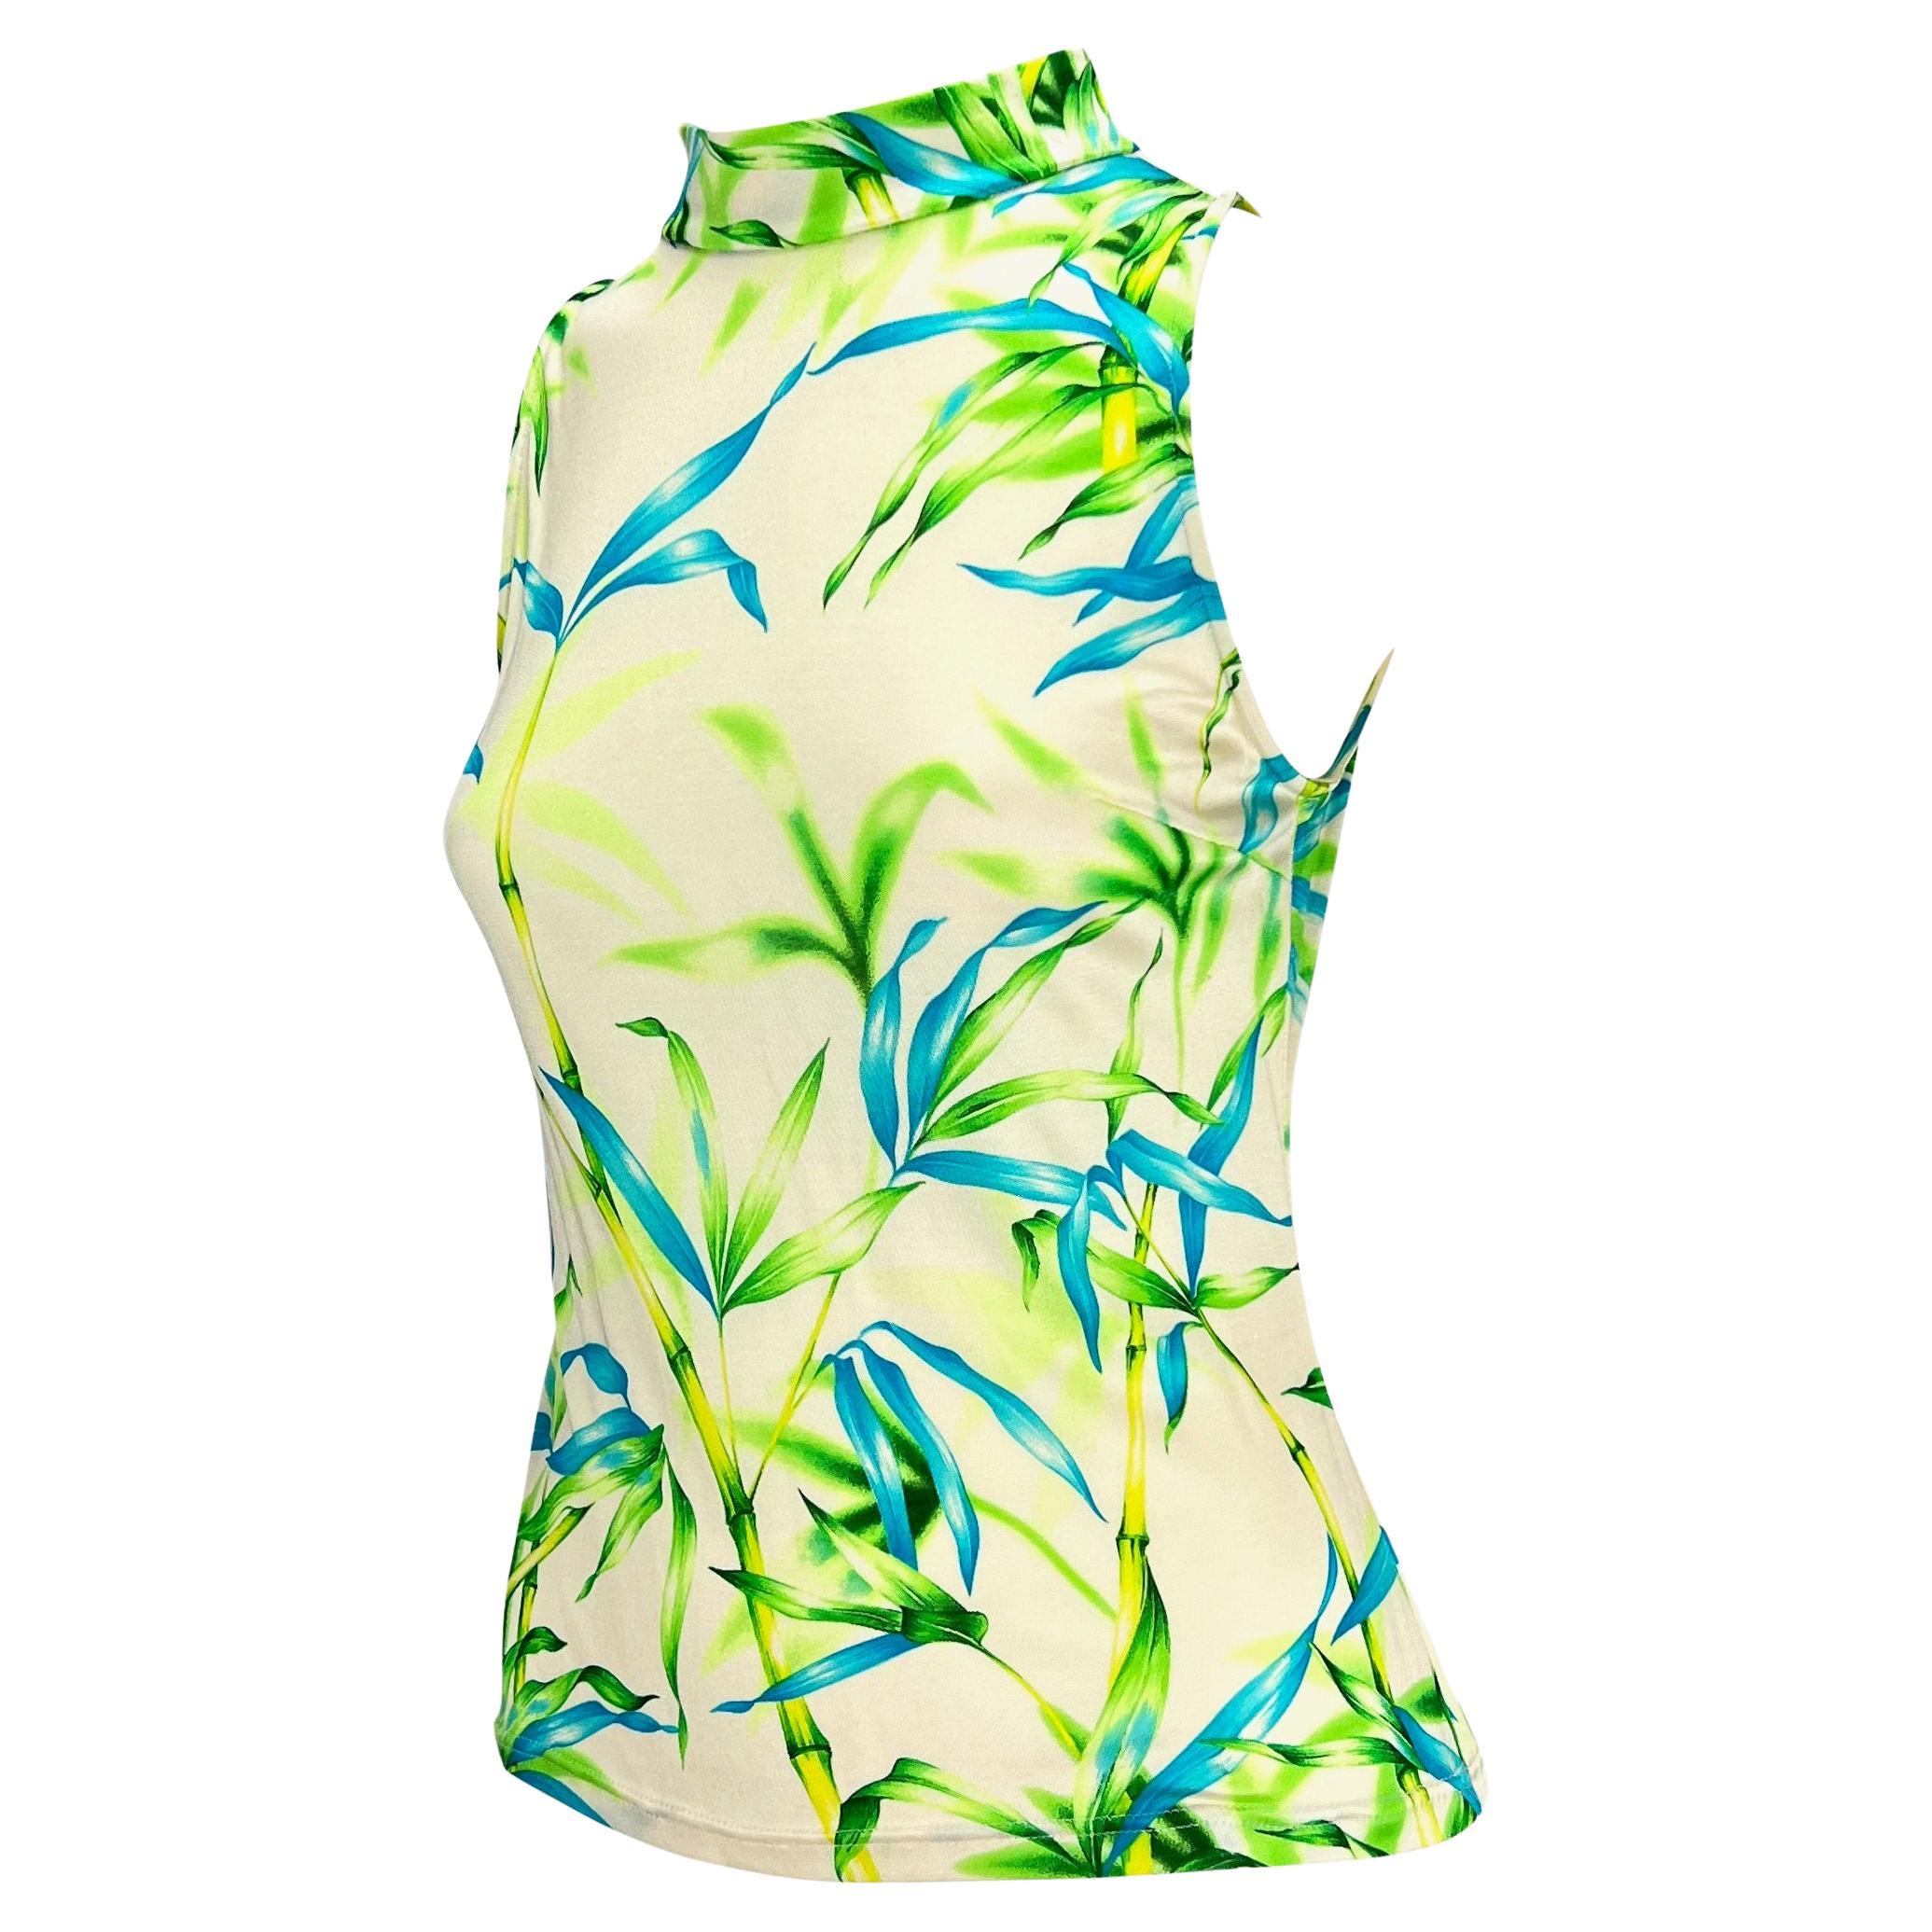 Presenting a sleeveless jungle print Gianni Versace shirt, designed by Donatella Versace. From the Spring/Summer 2000 collection, this pattern featuring green and blue neon bamboo debuted on look 14 modeled by Erin O'Connor. The top features a